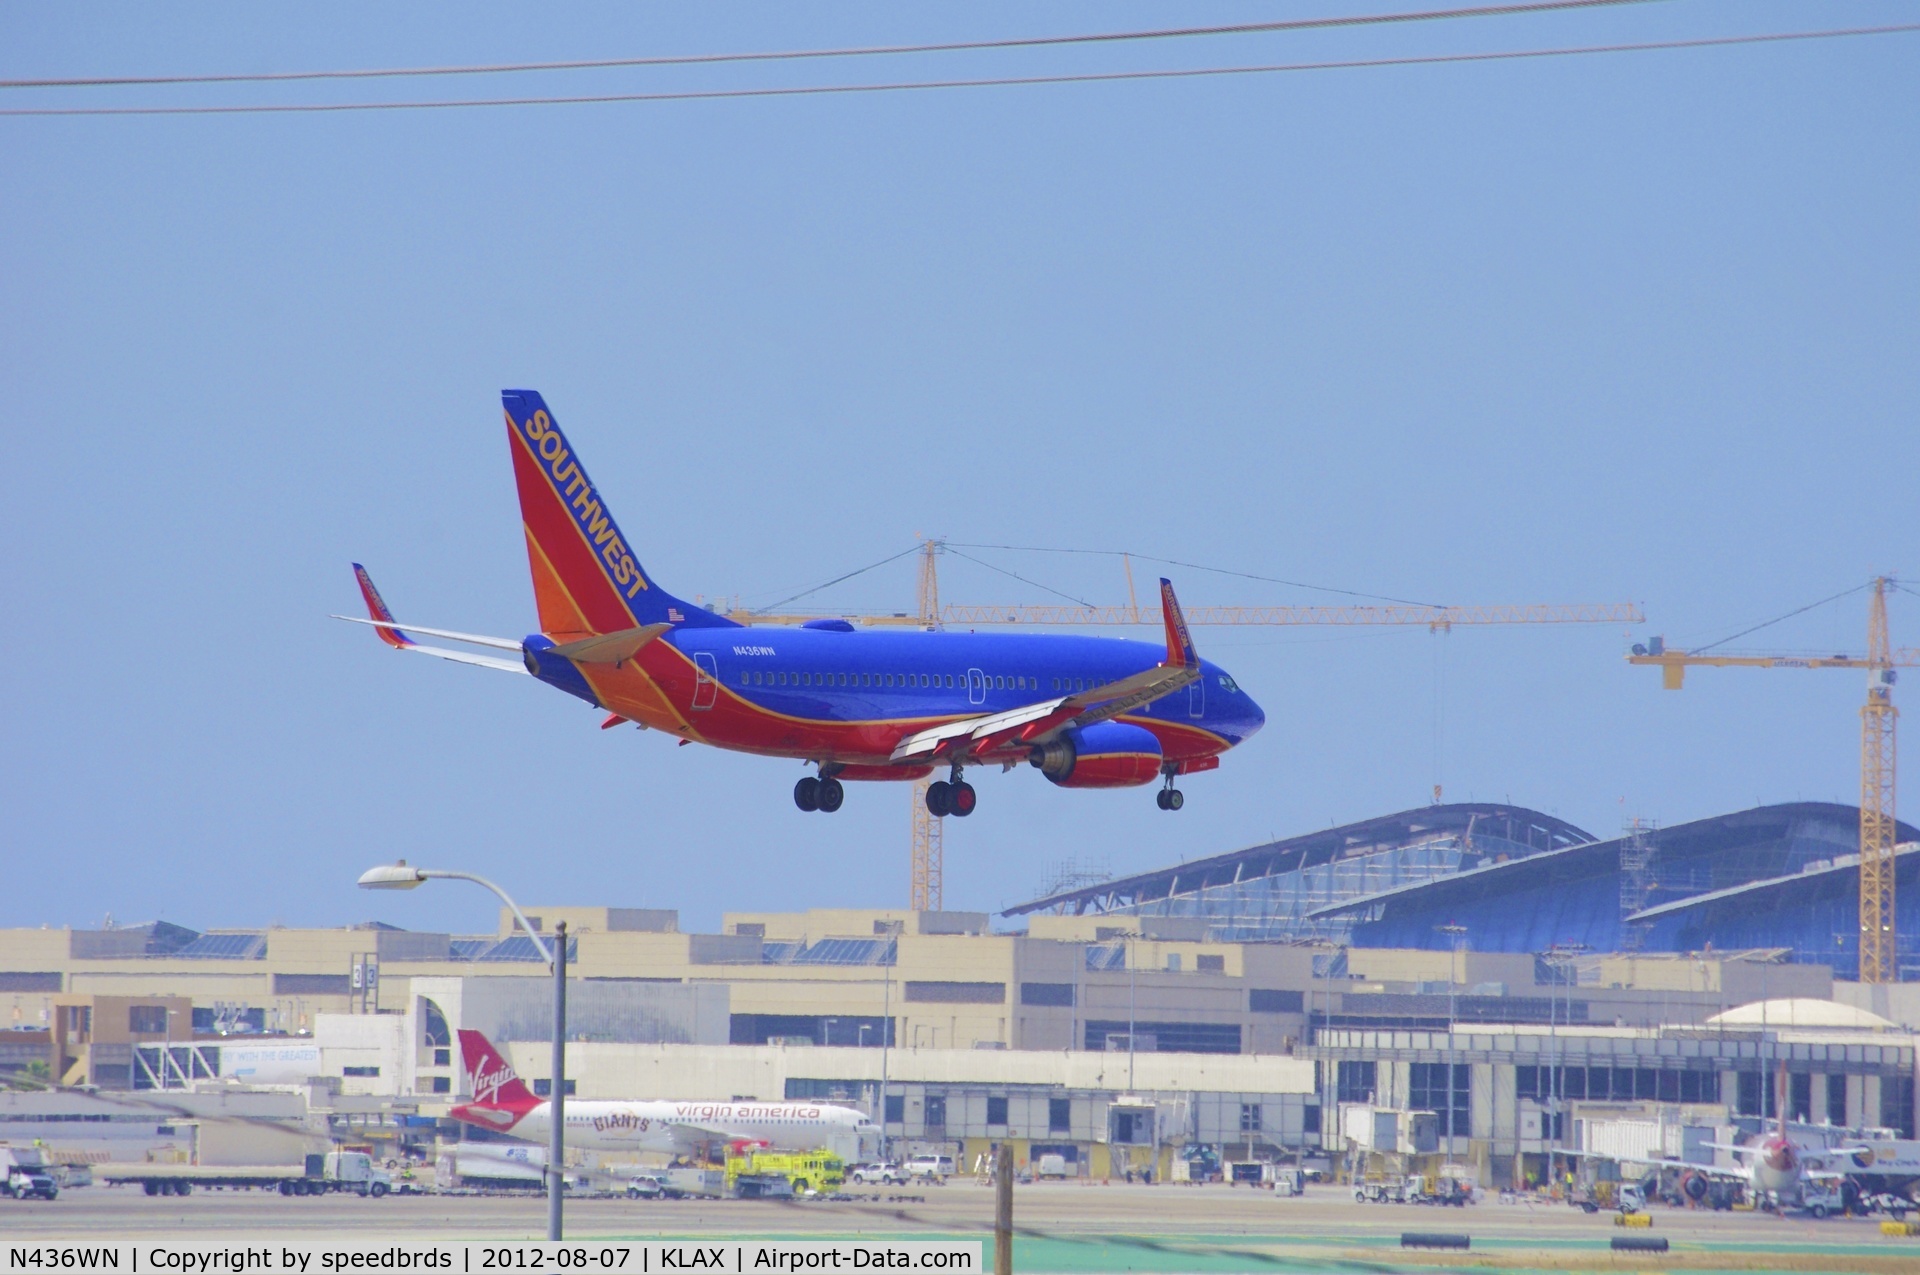 N436WN, 2003 Boeing 737-7H4 C/N 32456, Southwest 737 on on approach with Tom Bradley construction in background.